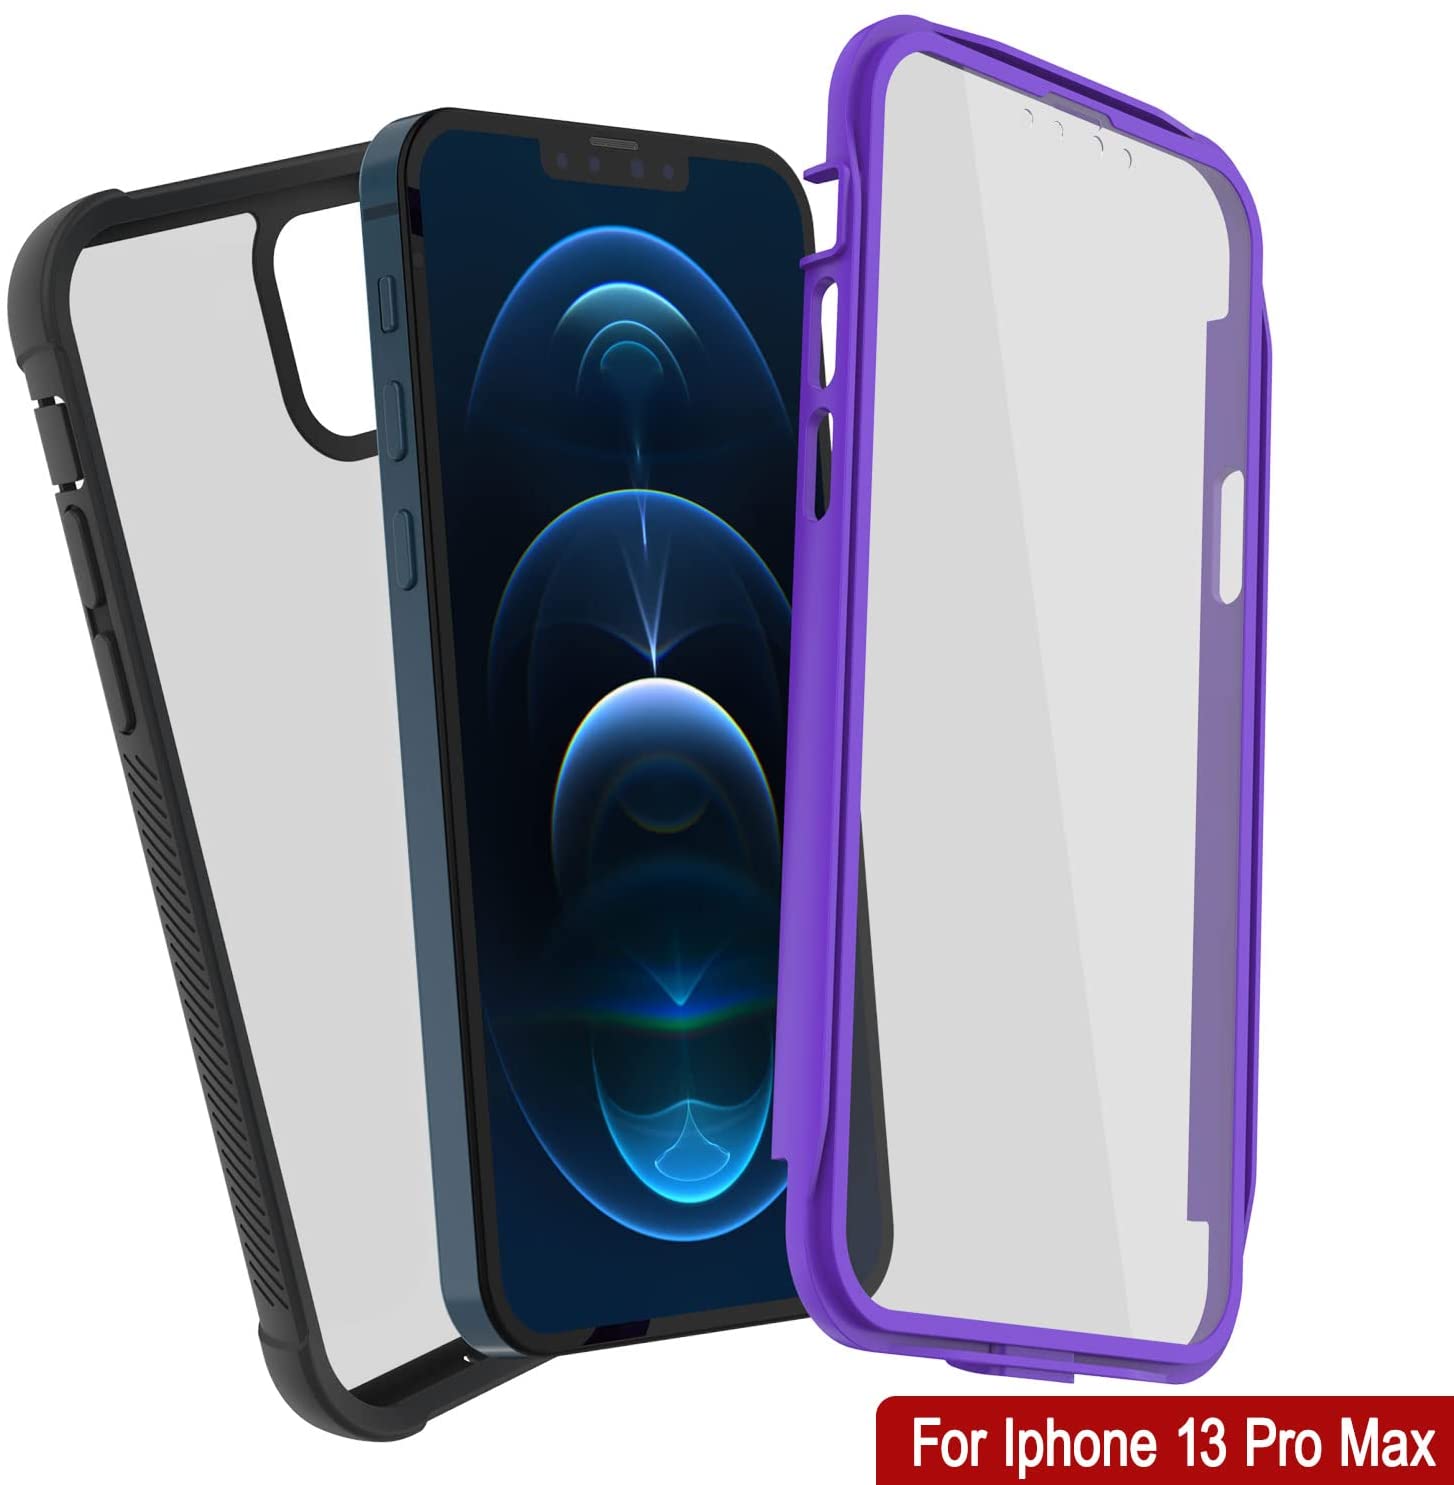 Coque iPhone 13 Pro Max (6.7') Protection Ultra Resistante